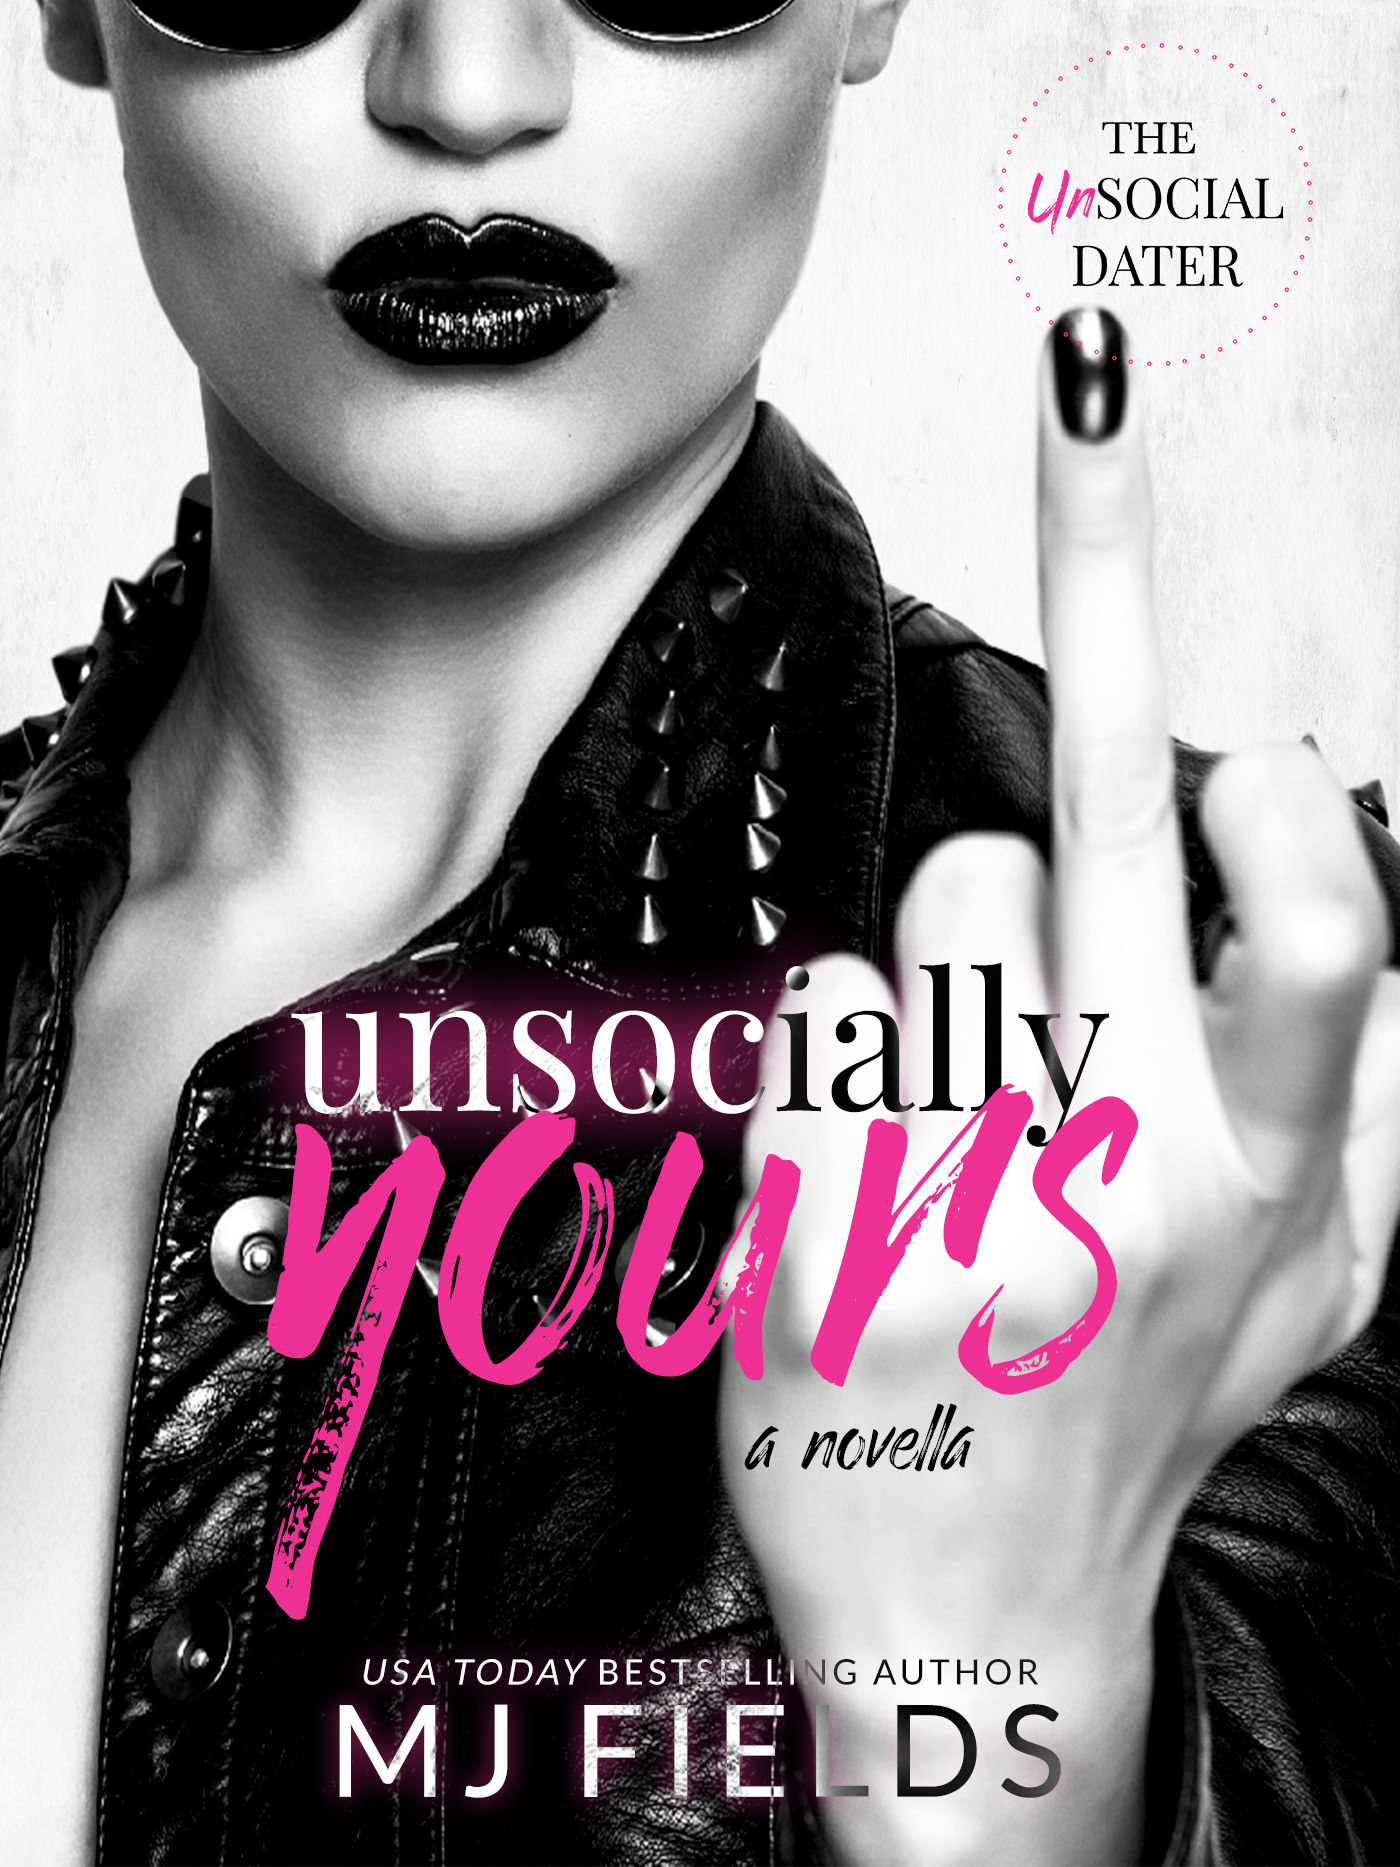 FREE: Unsocially Yours: The UnSocial Dater by MJ Fields